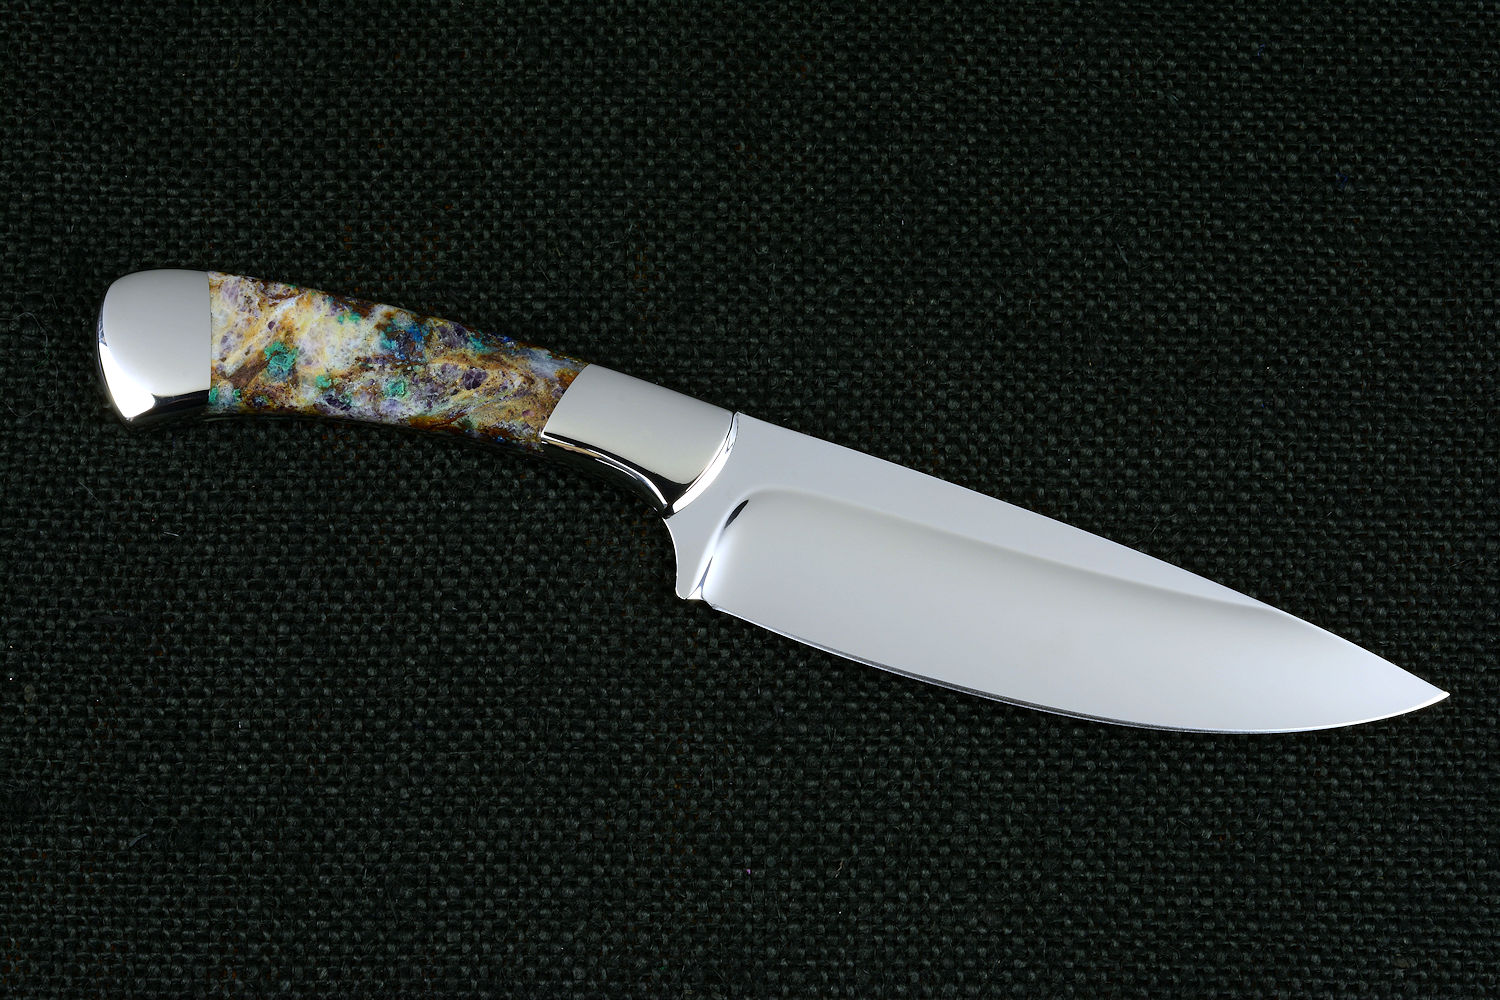 Cygnus ST, reverse side blade view,  in CPM154CM powder metal technology high molybenum stainless steel, T3 Deep cryogenically treated blade, 304 stainless steel bolsters, Kaleidoscope Stone gemstone handle, hand-dyed, hand-cast silicone prise